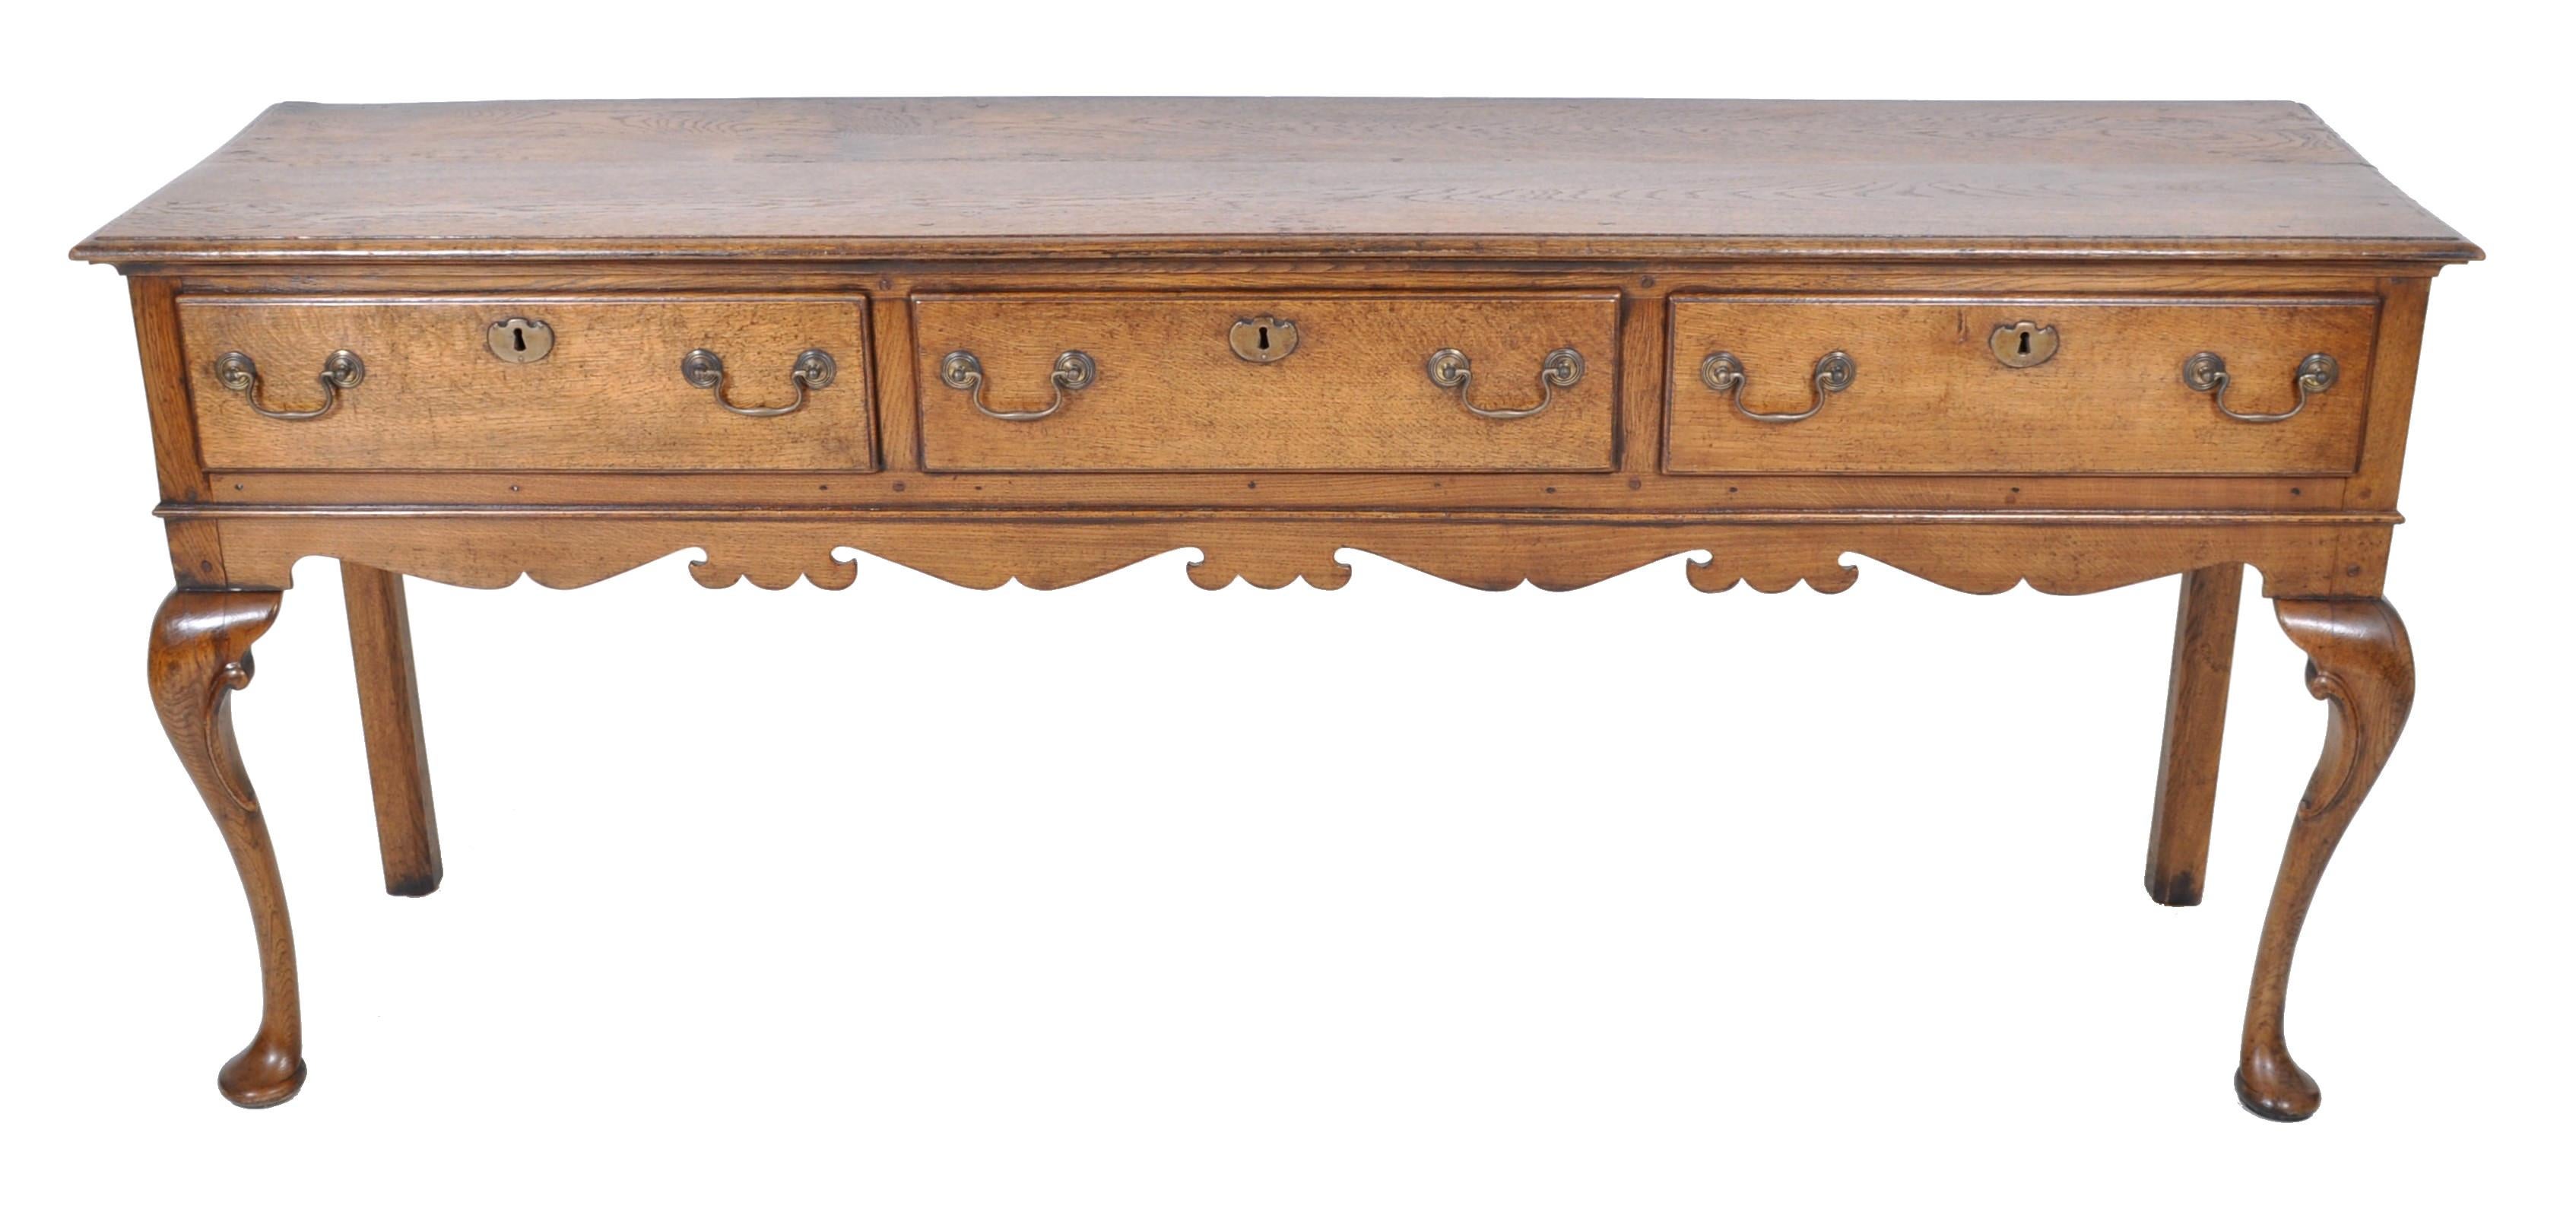 Antique Georgian oak dresser base, circa 1800. The dresser having an overhanging molded top, below three drawers with the original brass handles and escutcheons. The dresser standing on cabriole legs joined by a shaped skirt and terminating to pad